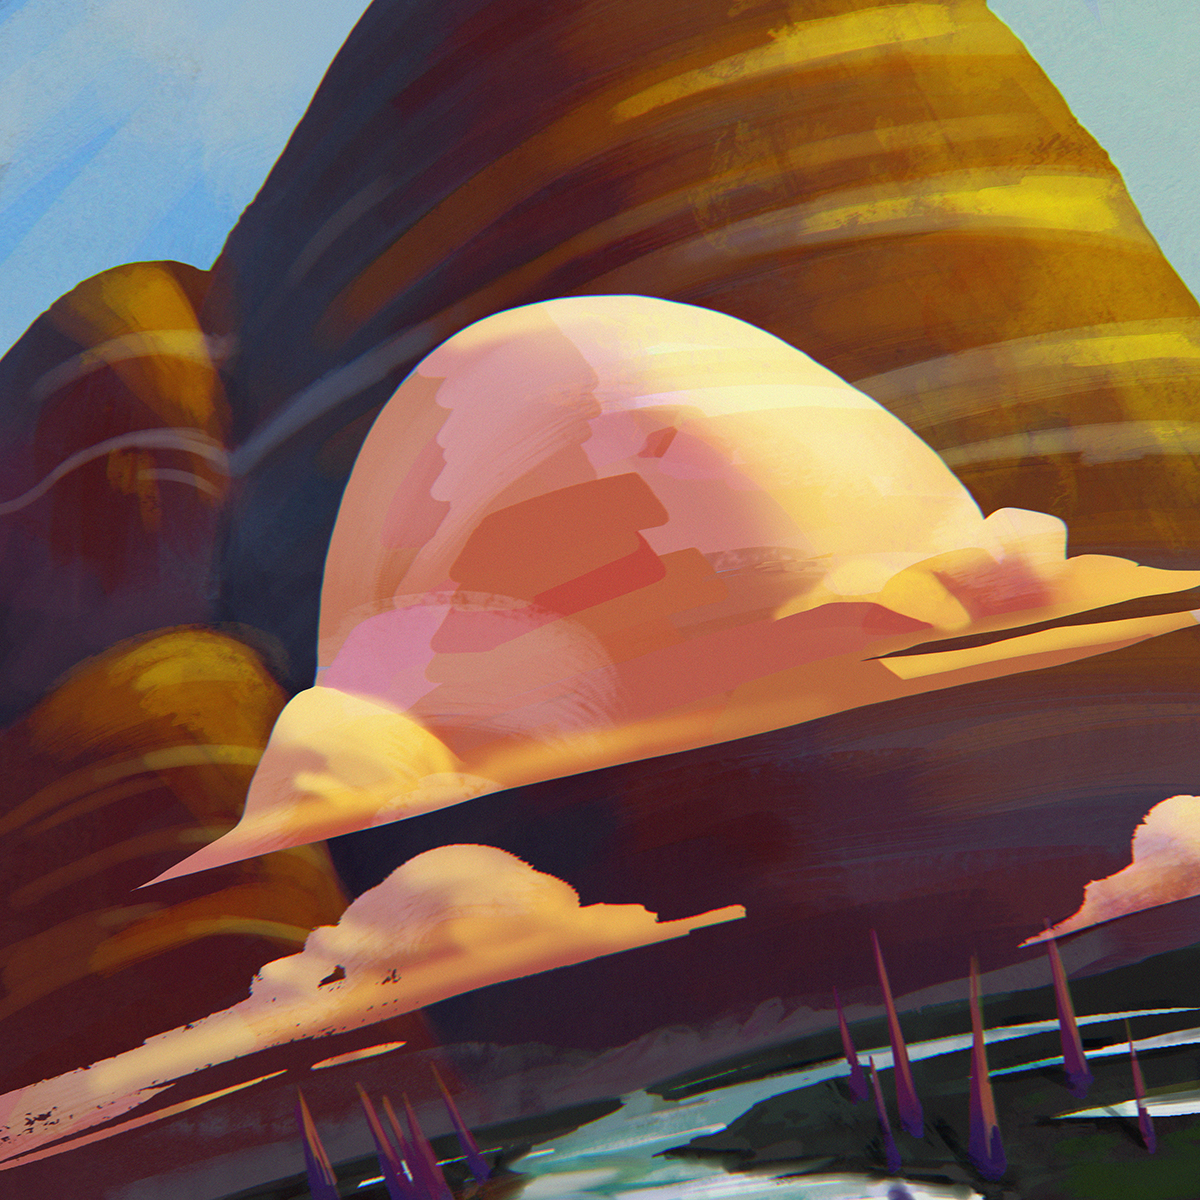 Mystical landscape illustration with barren river landscape and large round hilly brown mountain in background with pink puffy floating cloud in foreground